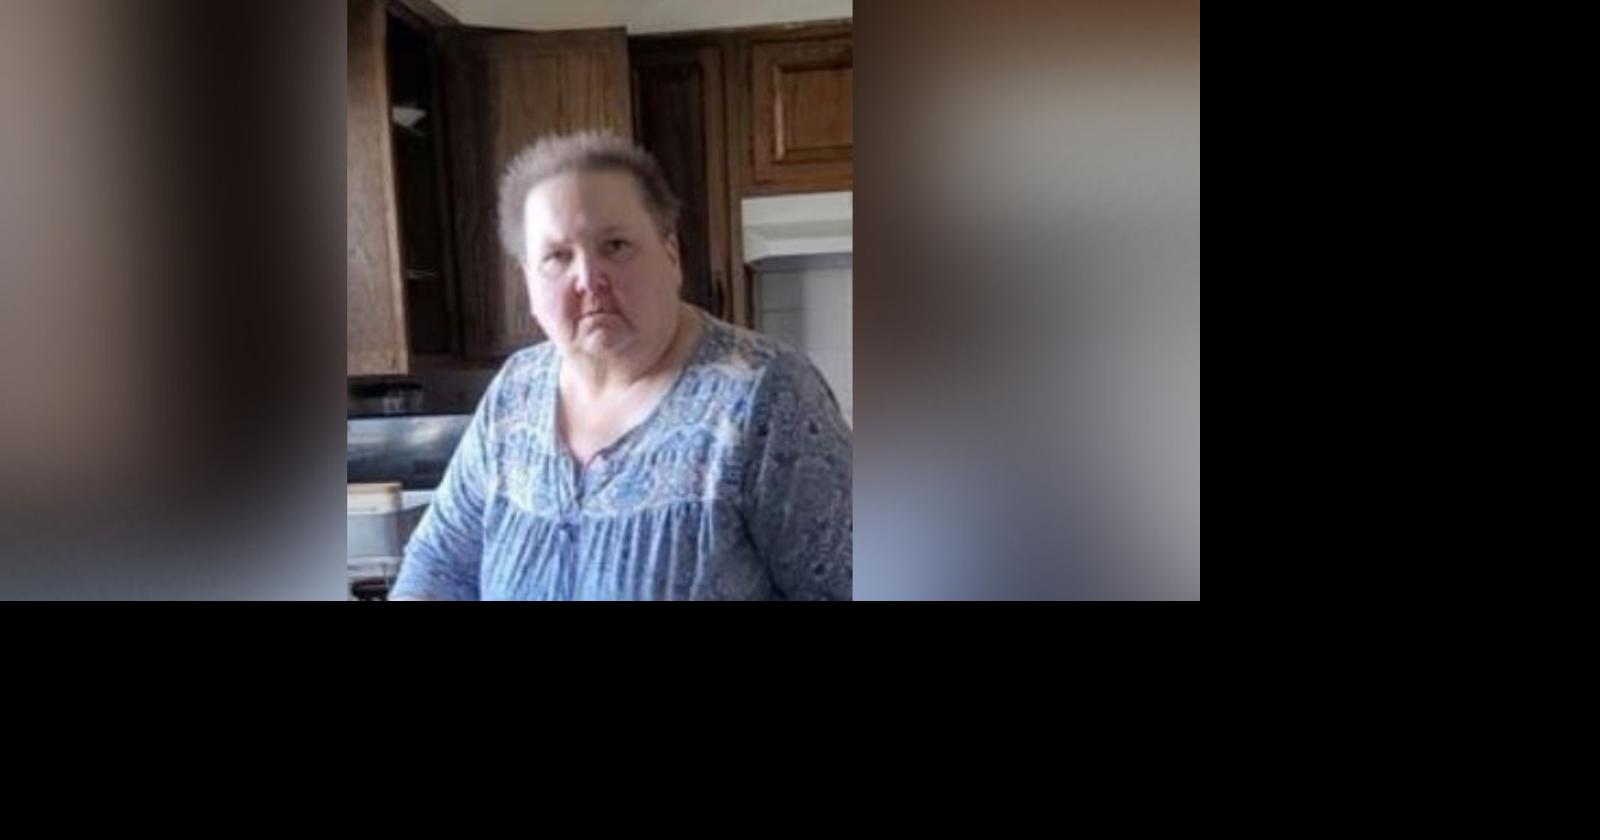 Missing At Risk Woman In Spokane Found Safe News 4786